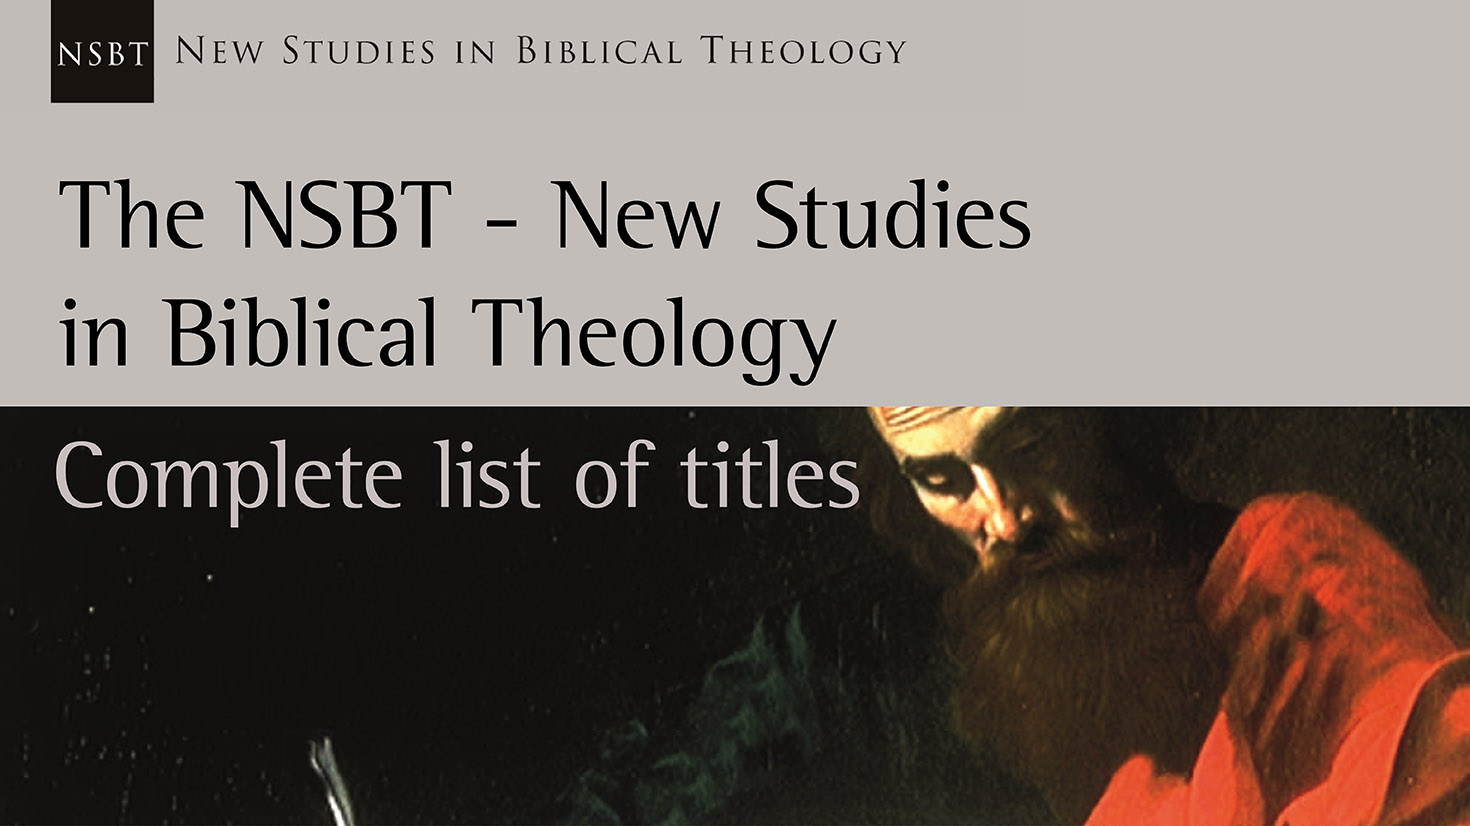 The NSBT - New Studies in Biblical Theology: complete list of titles